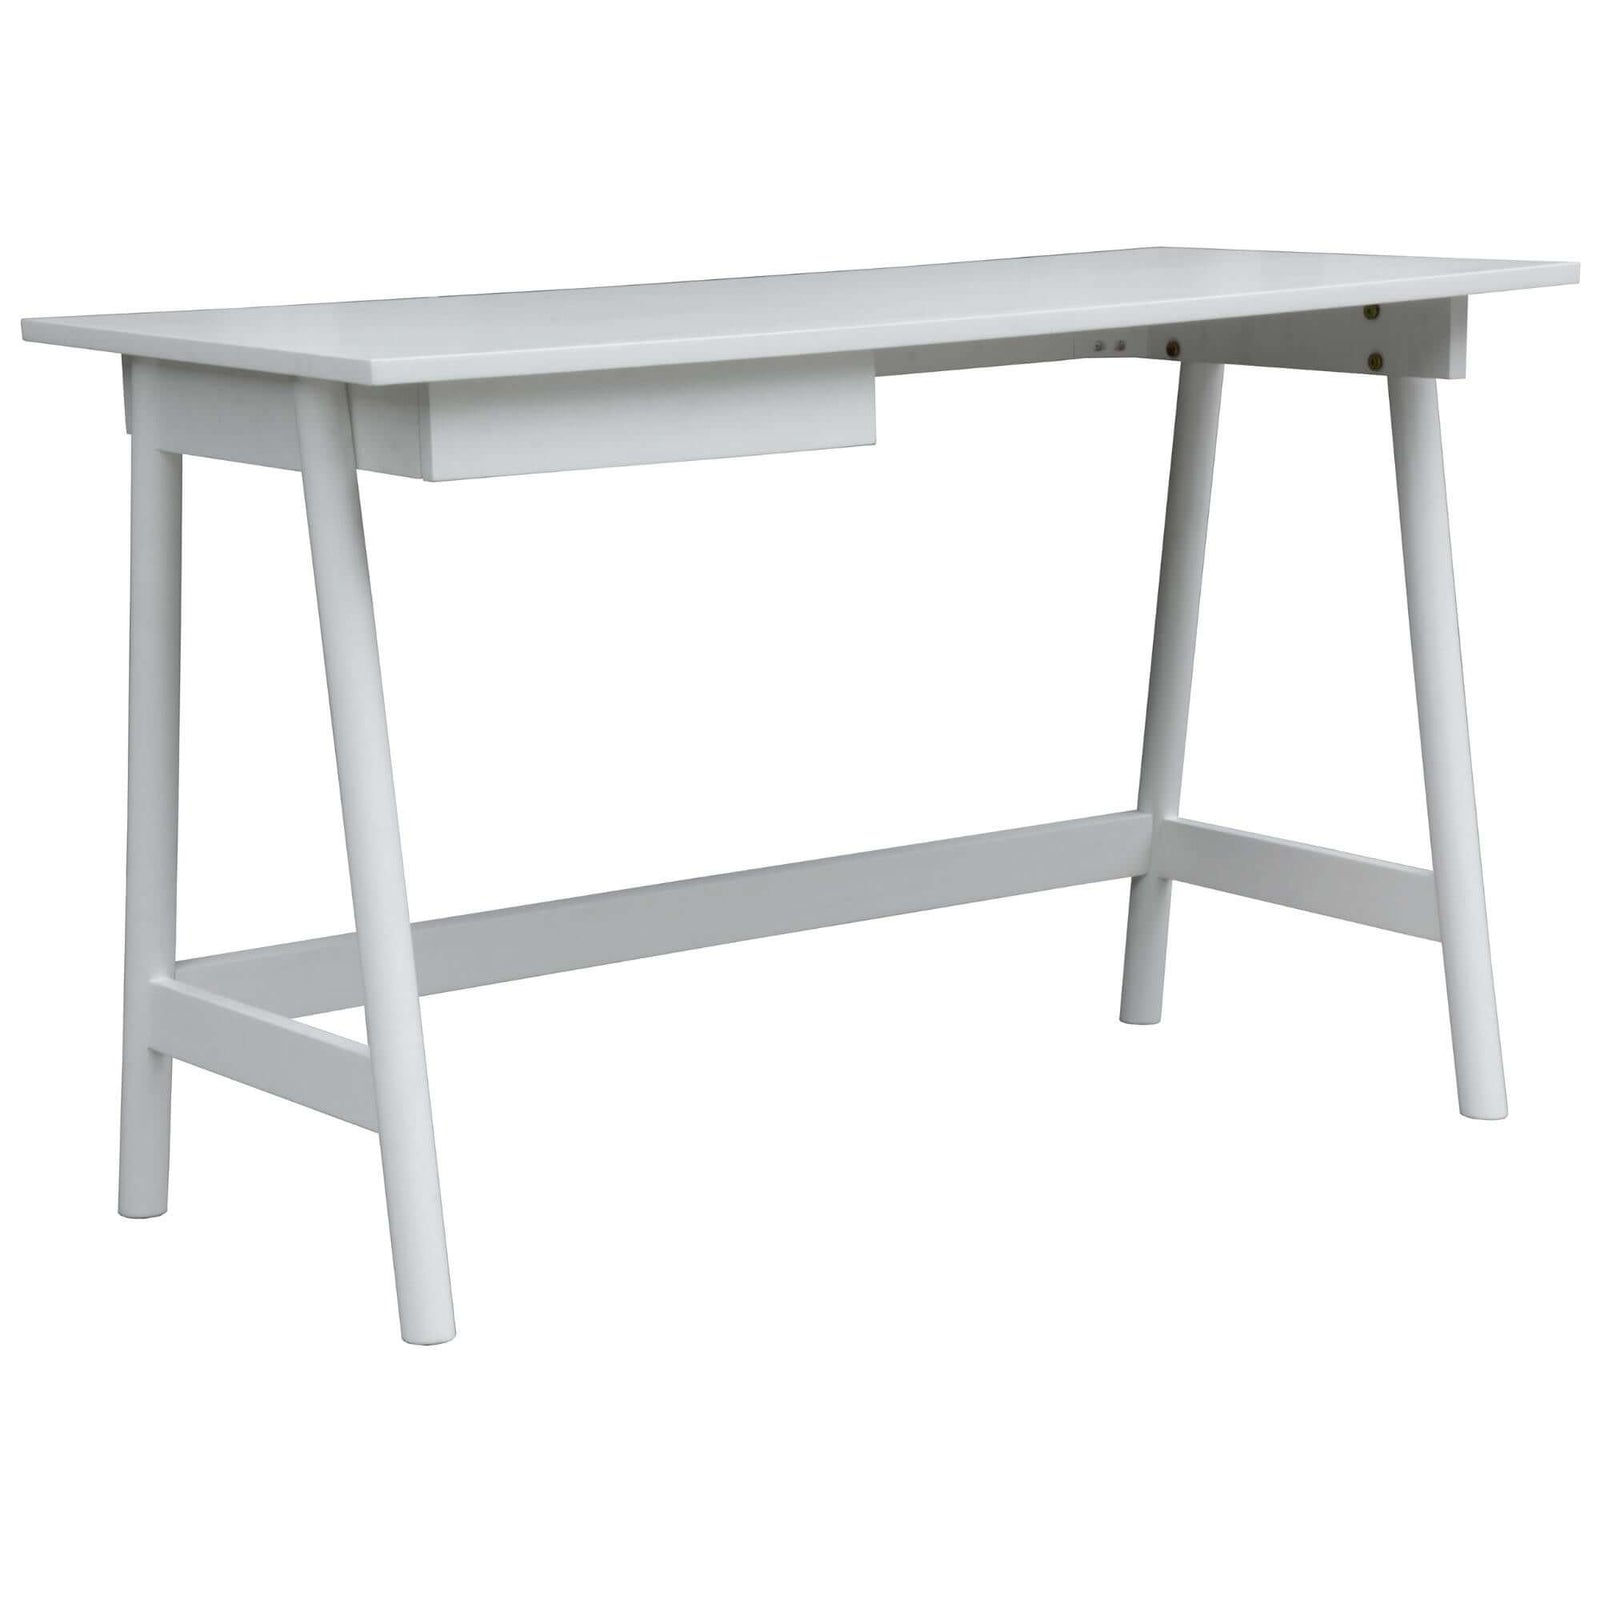 Mindil Office Desk Student Study Table Solid Wooden Timber Frame - White-Upinteriors